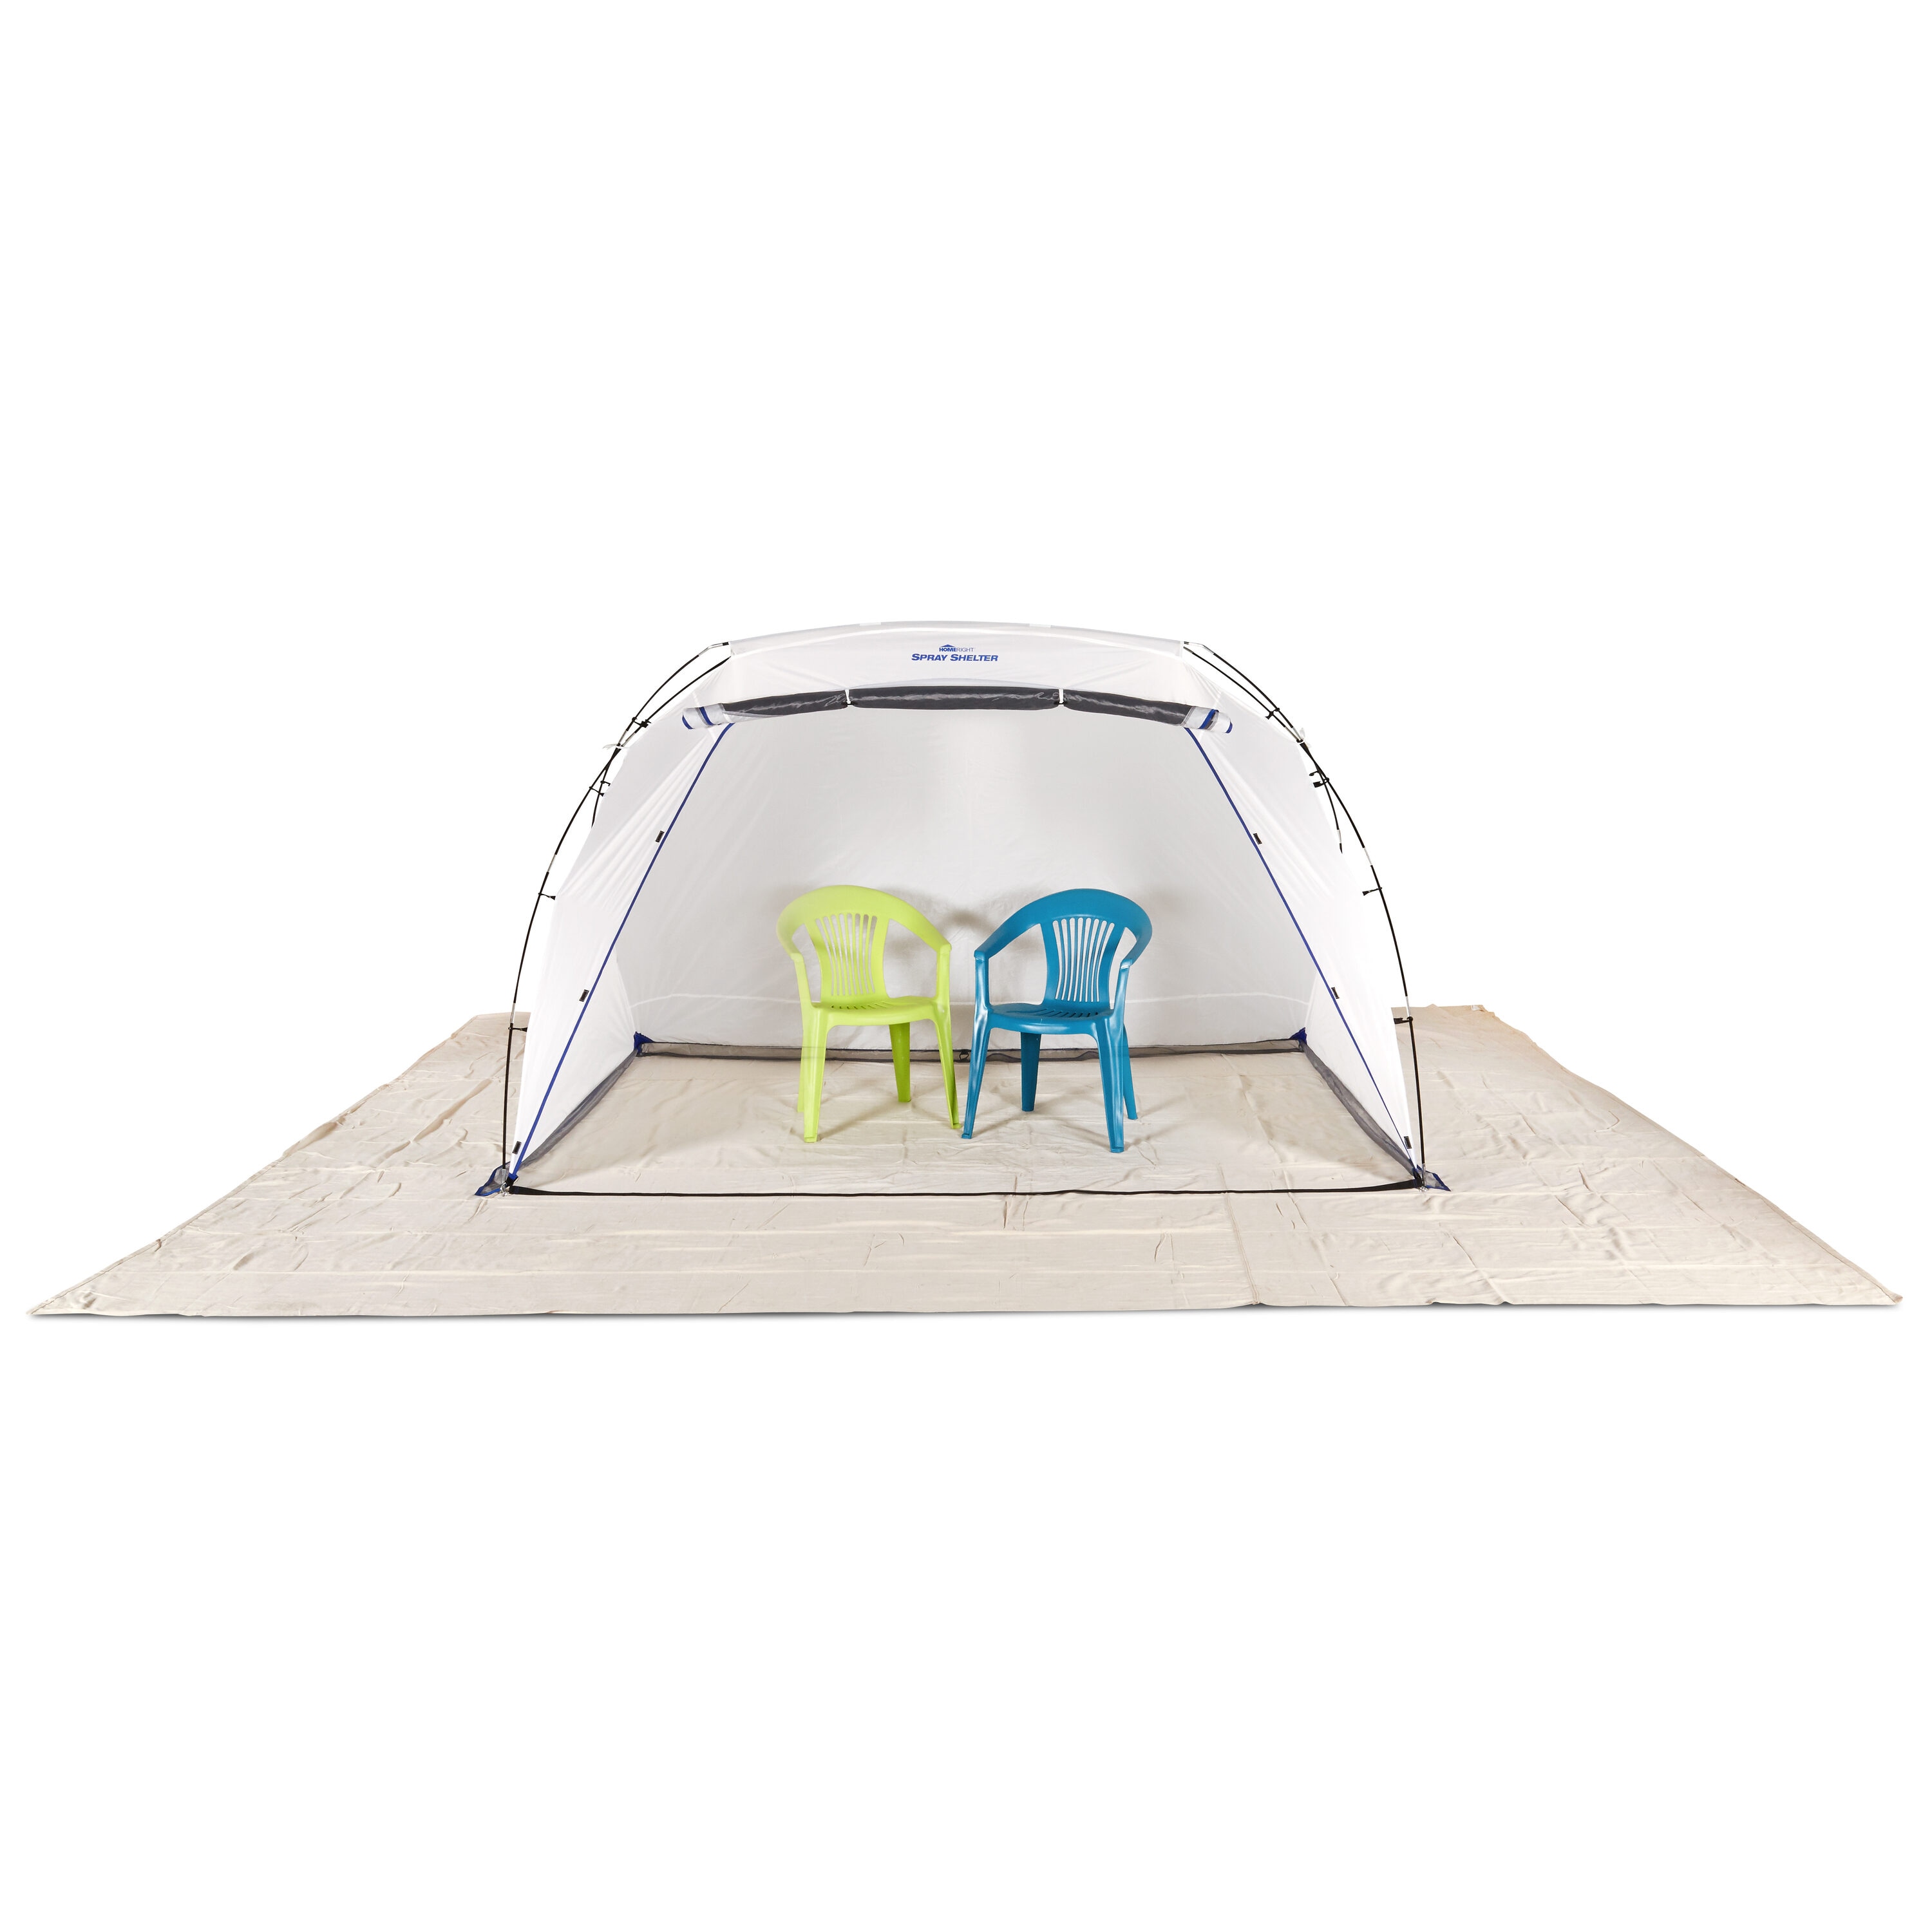 Spray Paint Tent, Large Spray Shelter With 4 X Painters Pyramid